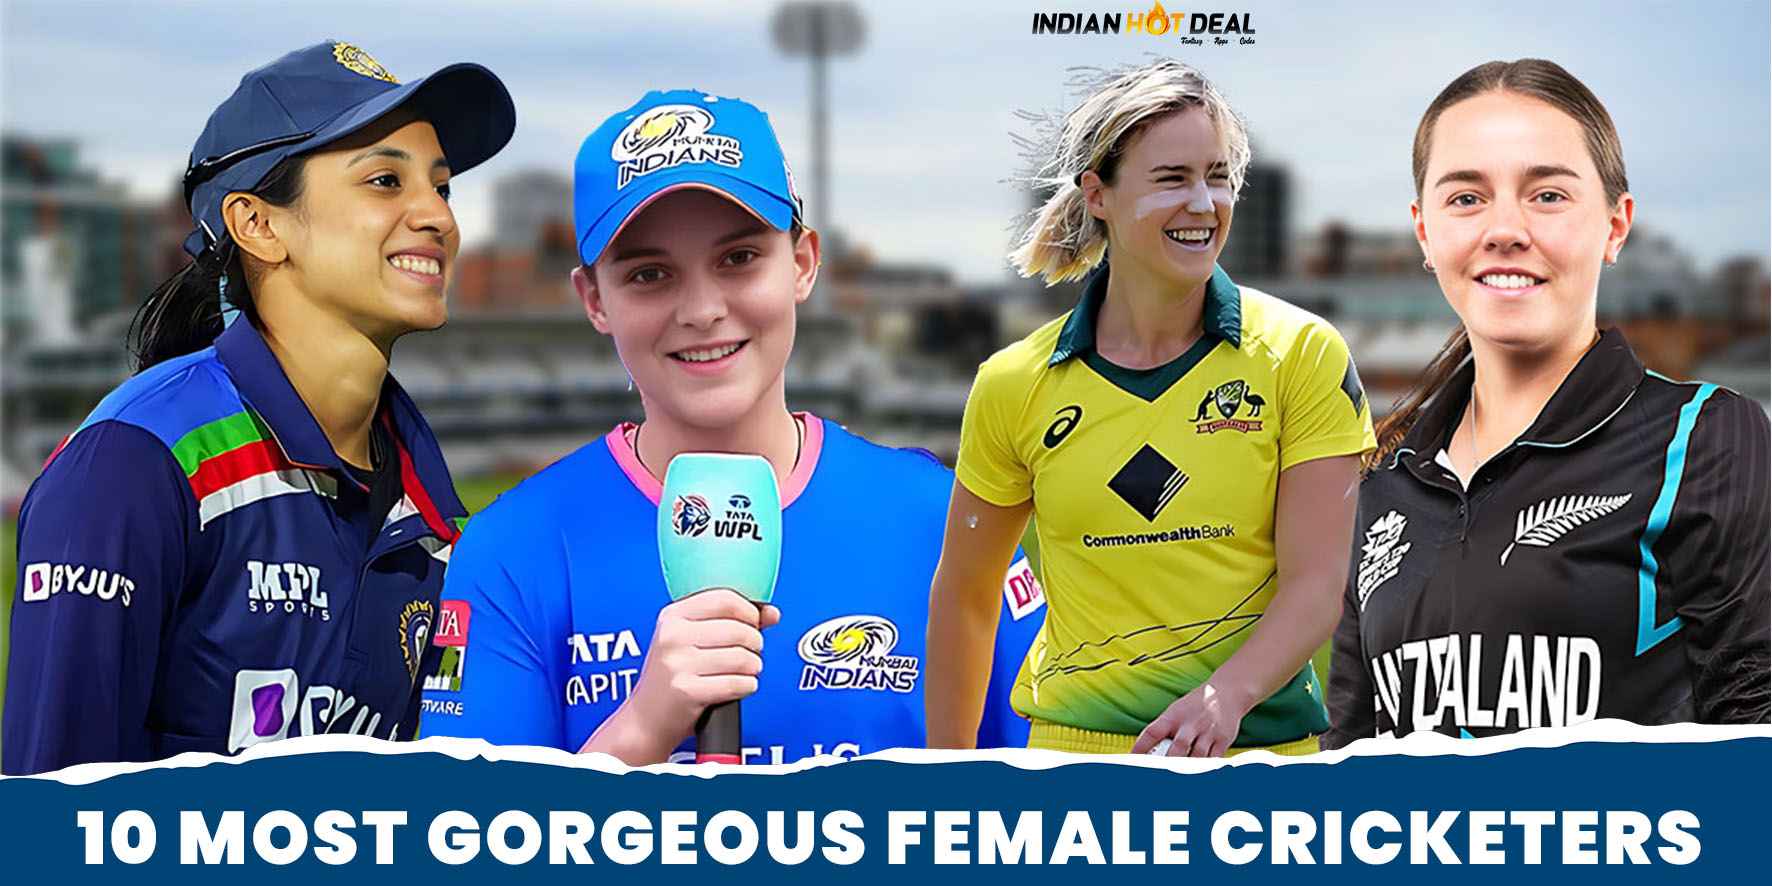 10 Most Gorgeous Female Cricketers